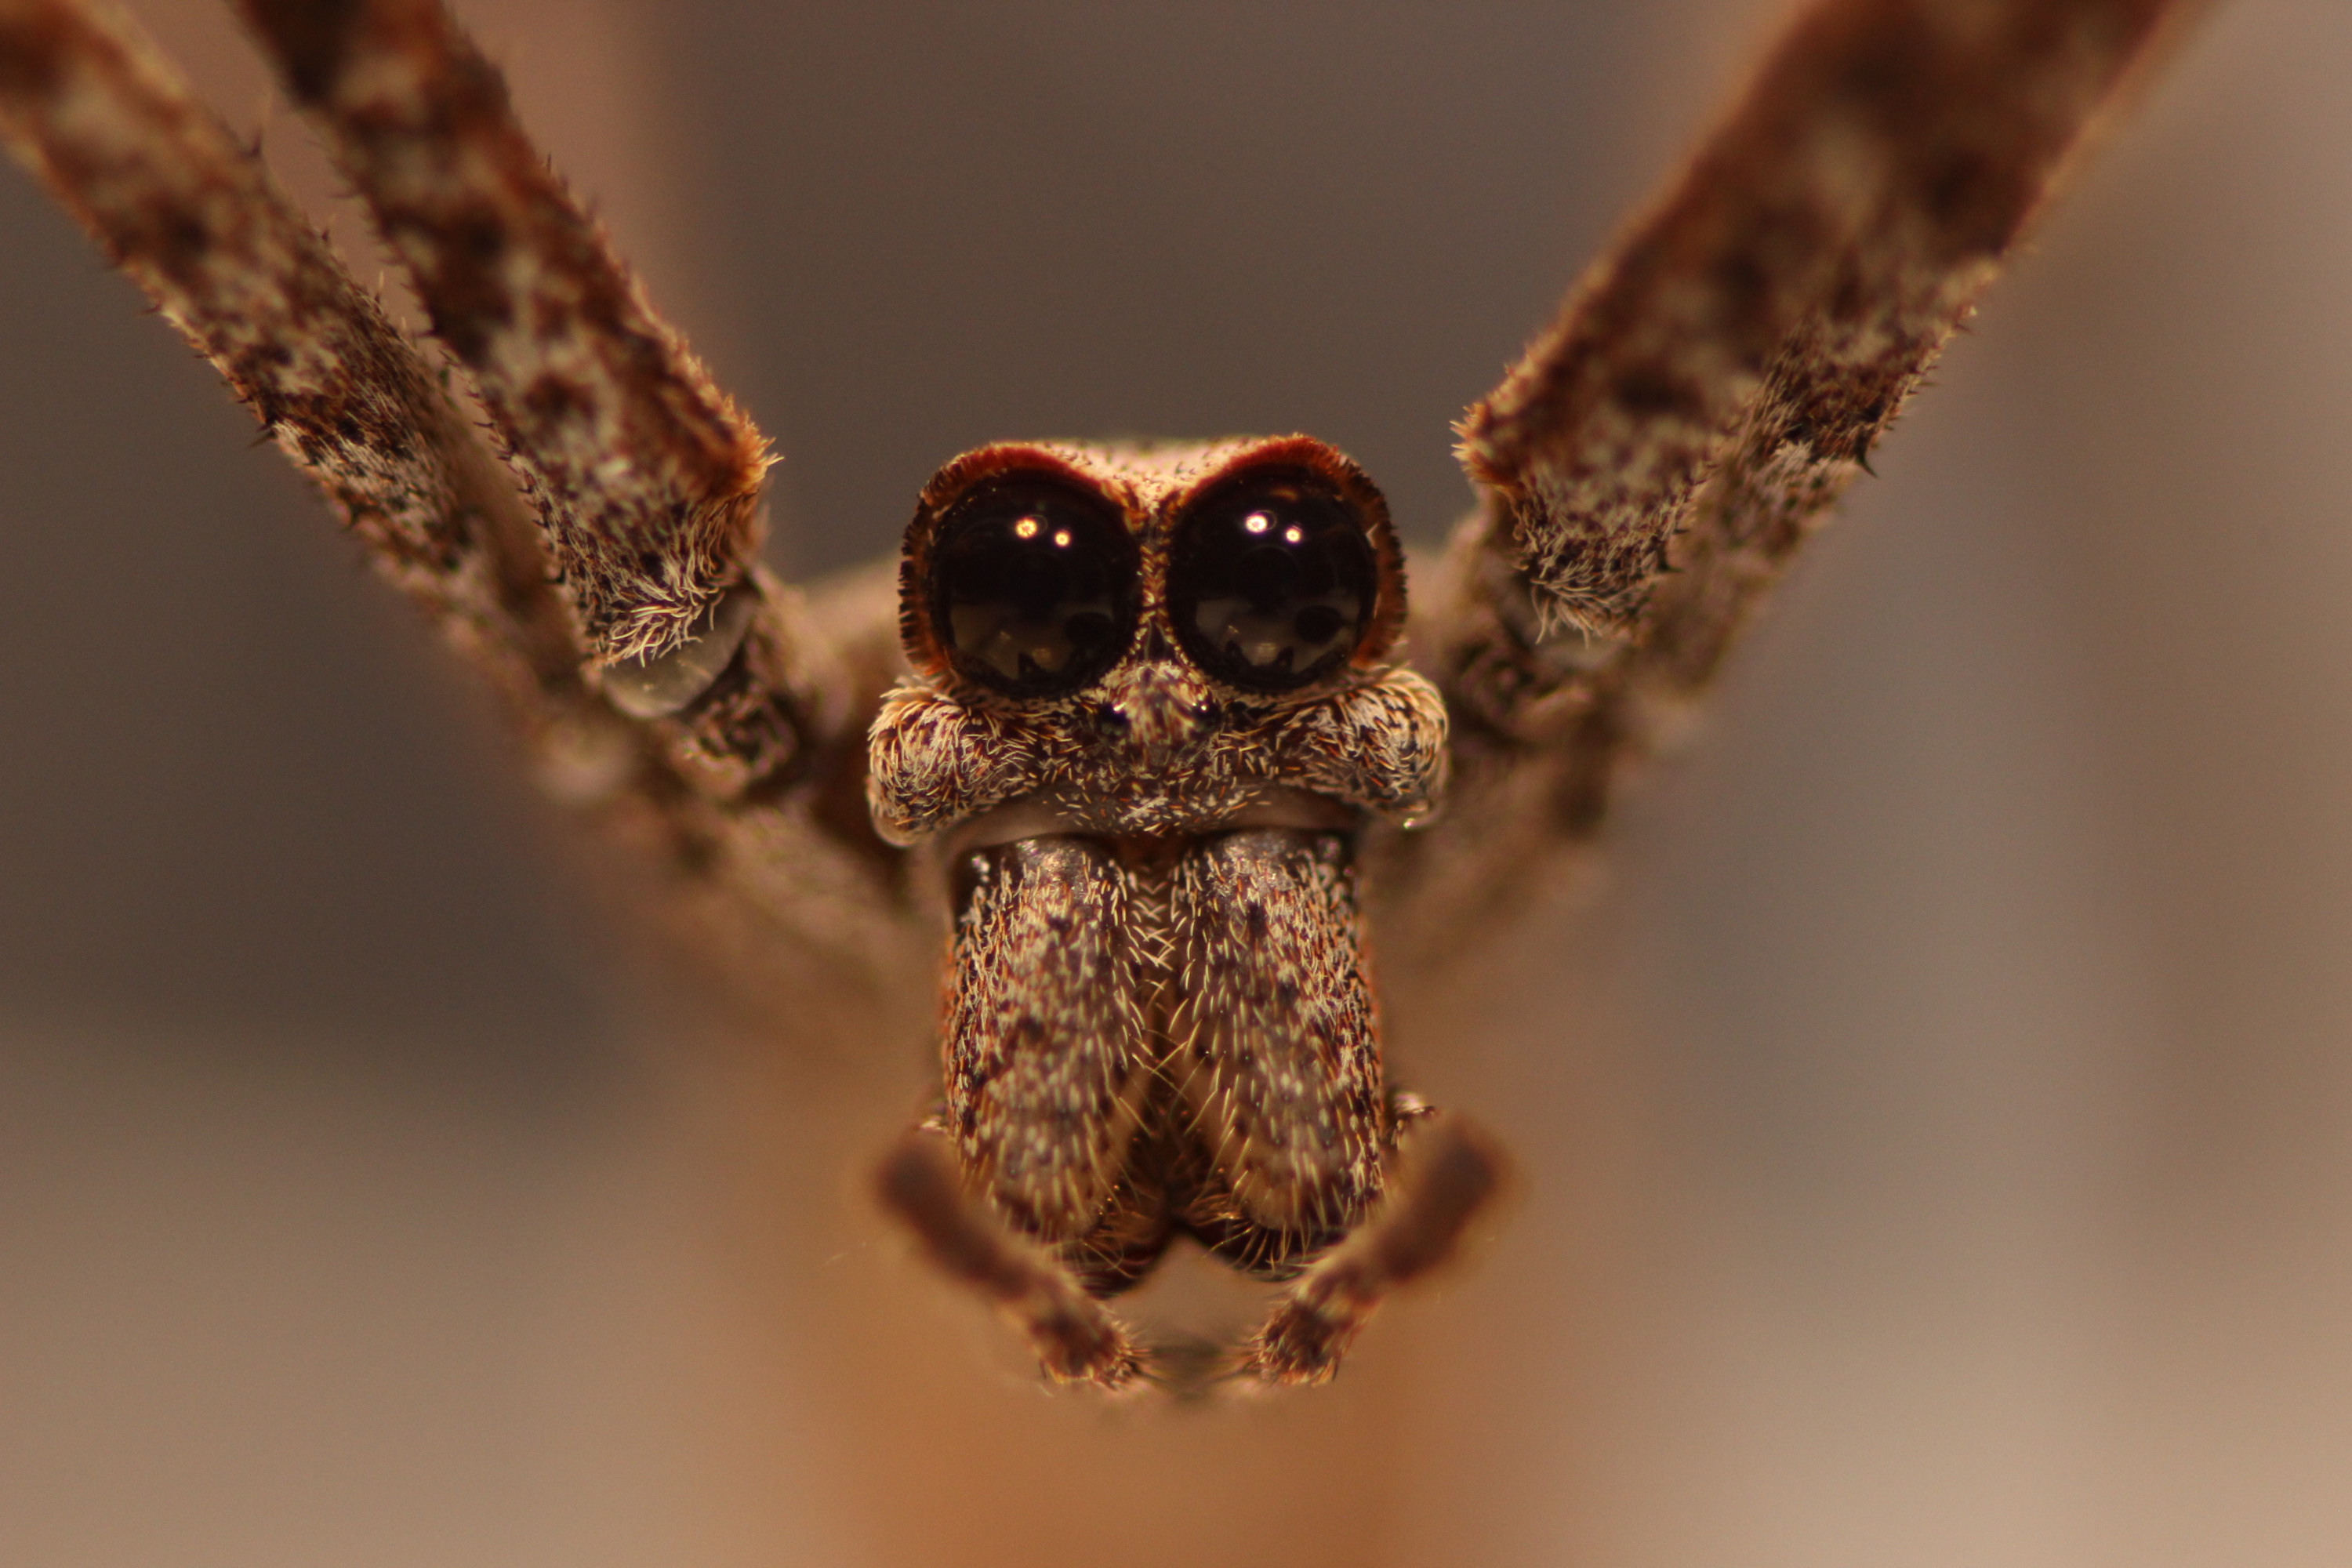 Big spider eyes put more insects on the menu | Cosmos